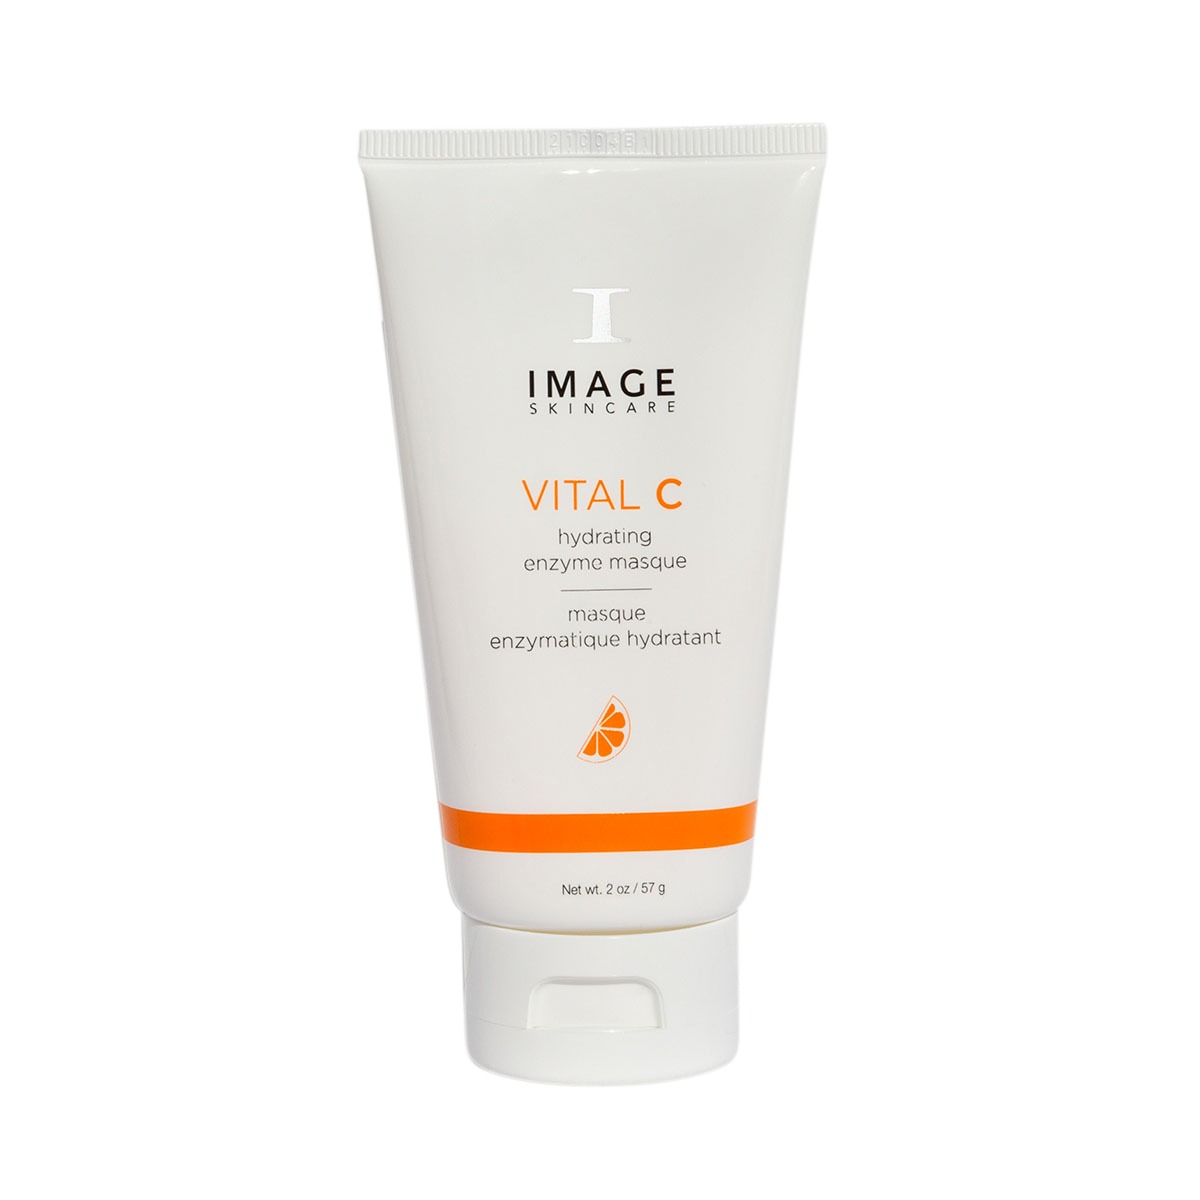 Mặt nạ phục hồi Image Skincare Vital C Hydrating Enzyme Masque